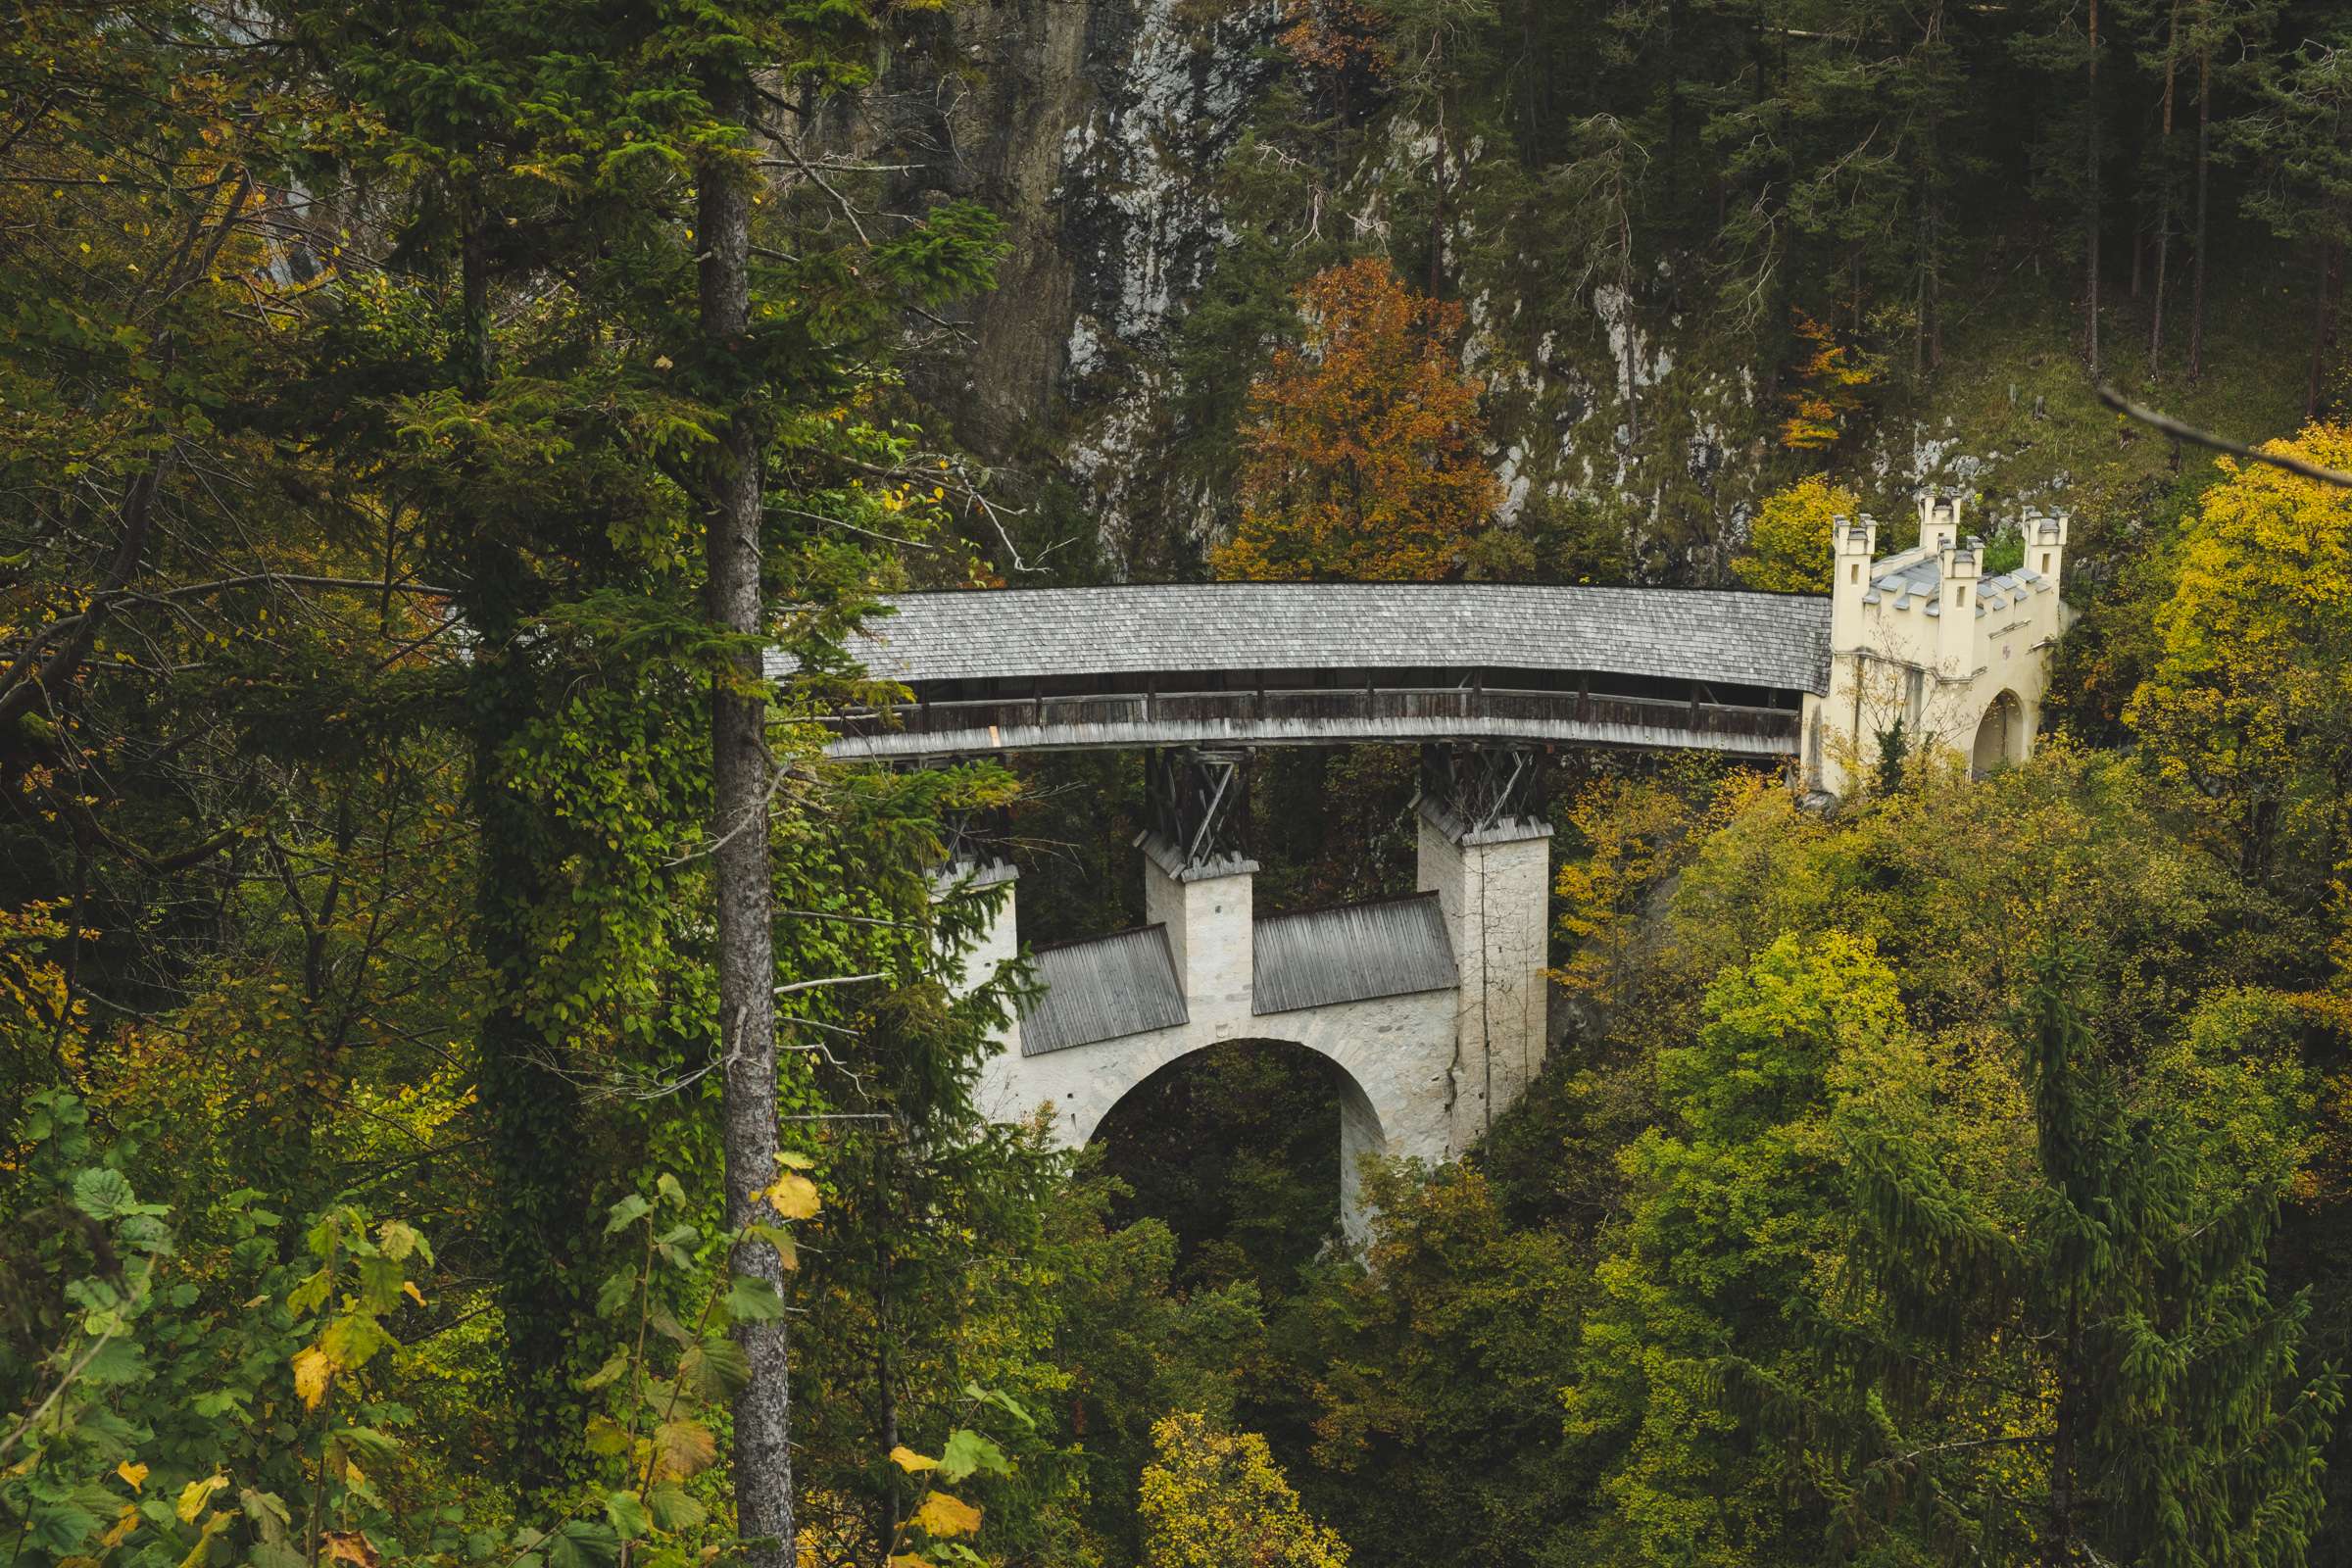 The magnificent bridge to St. Georgenberg monastery